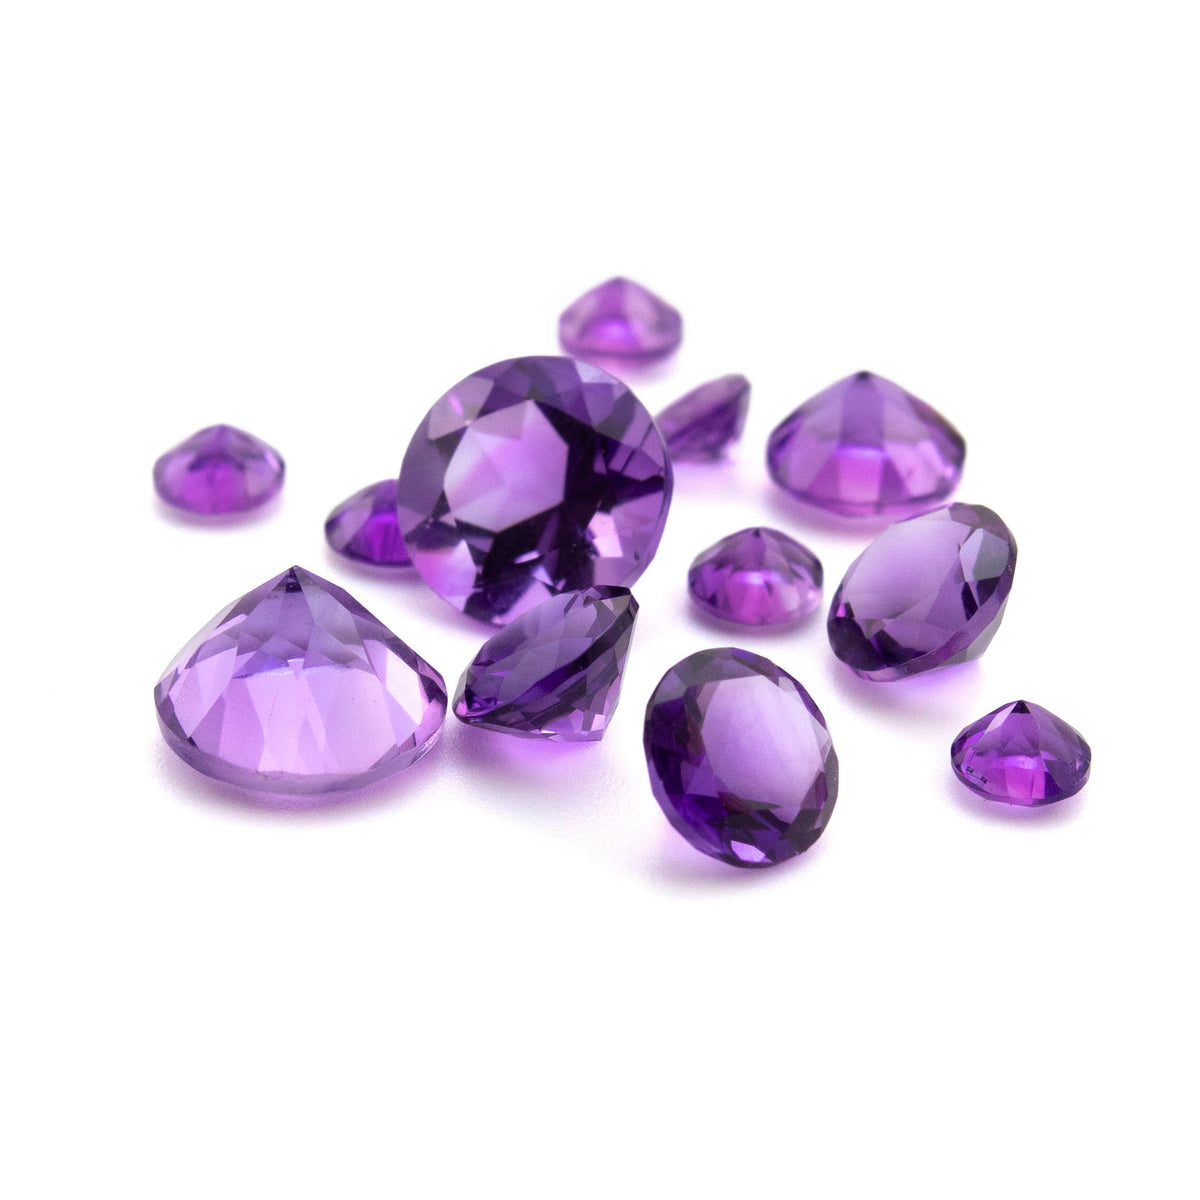 Details about   AAA Quality Natural Purple Amethyst Round Cabochon Loose Gemstones 11x11MM 